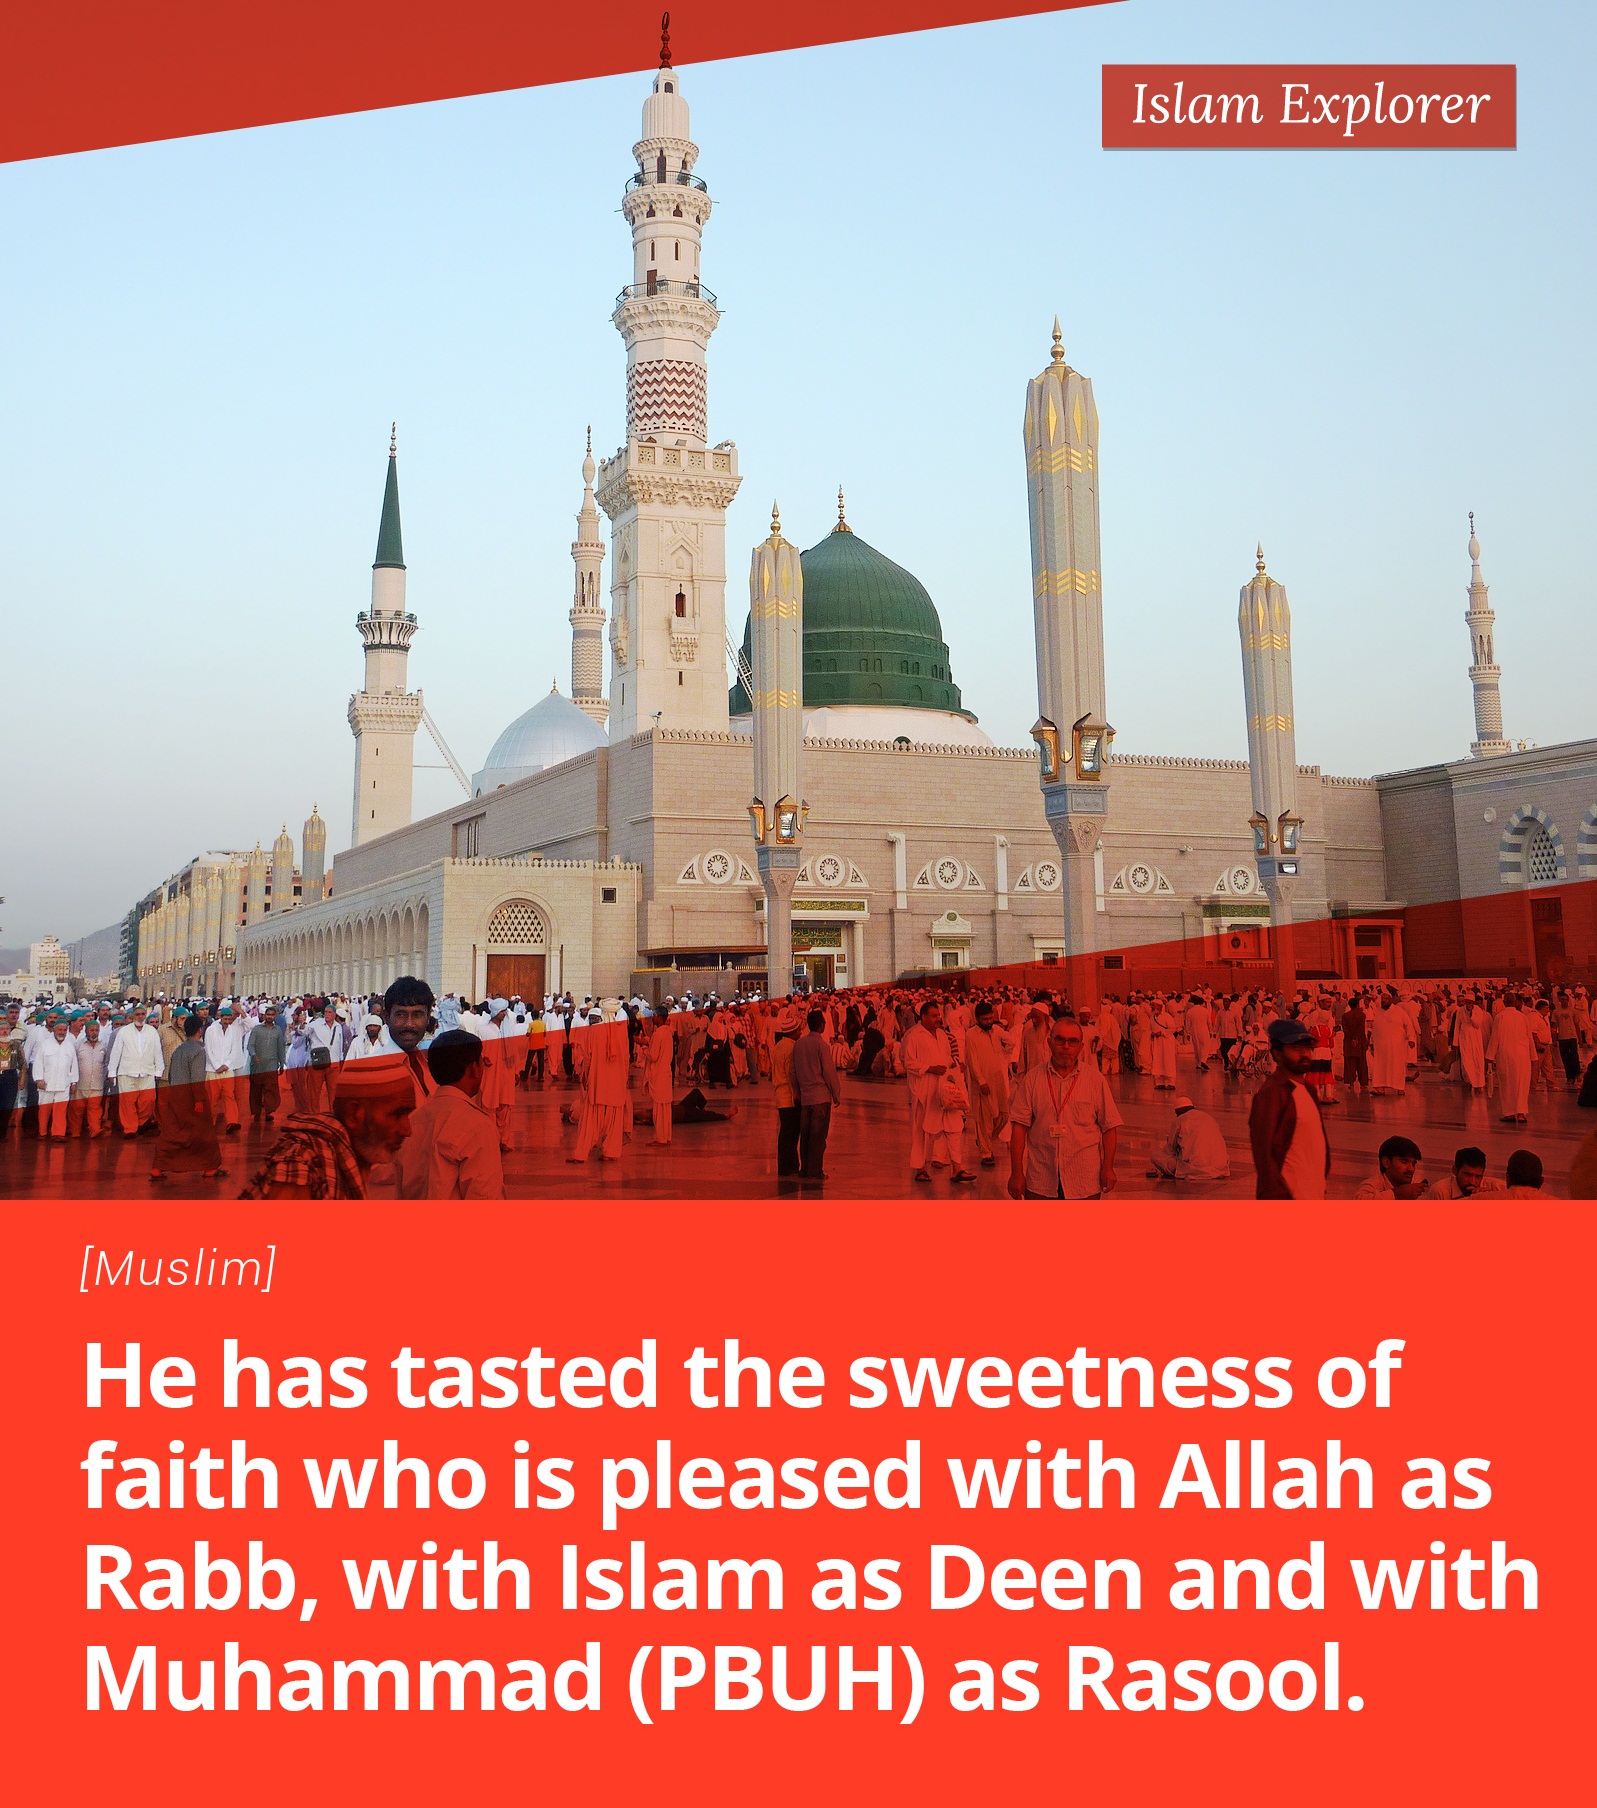 He has tasted the sweetness of faith who is pleased with Allah